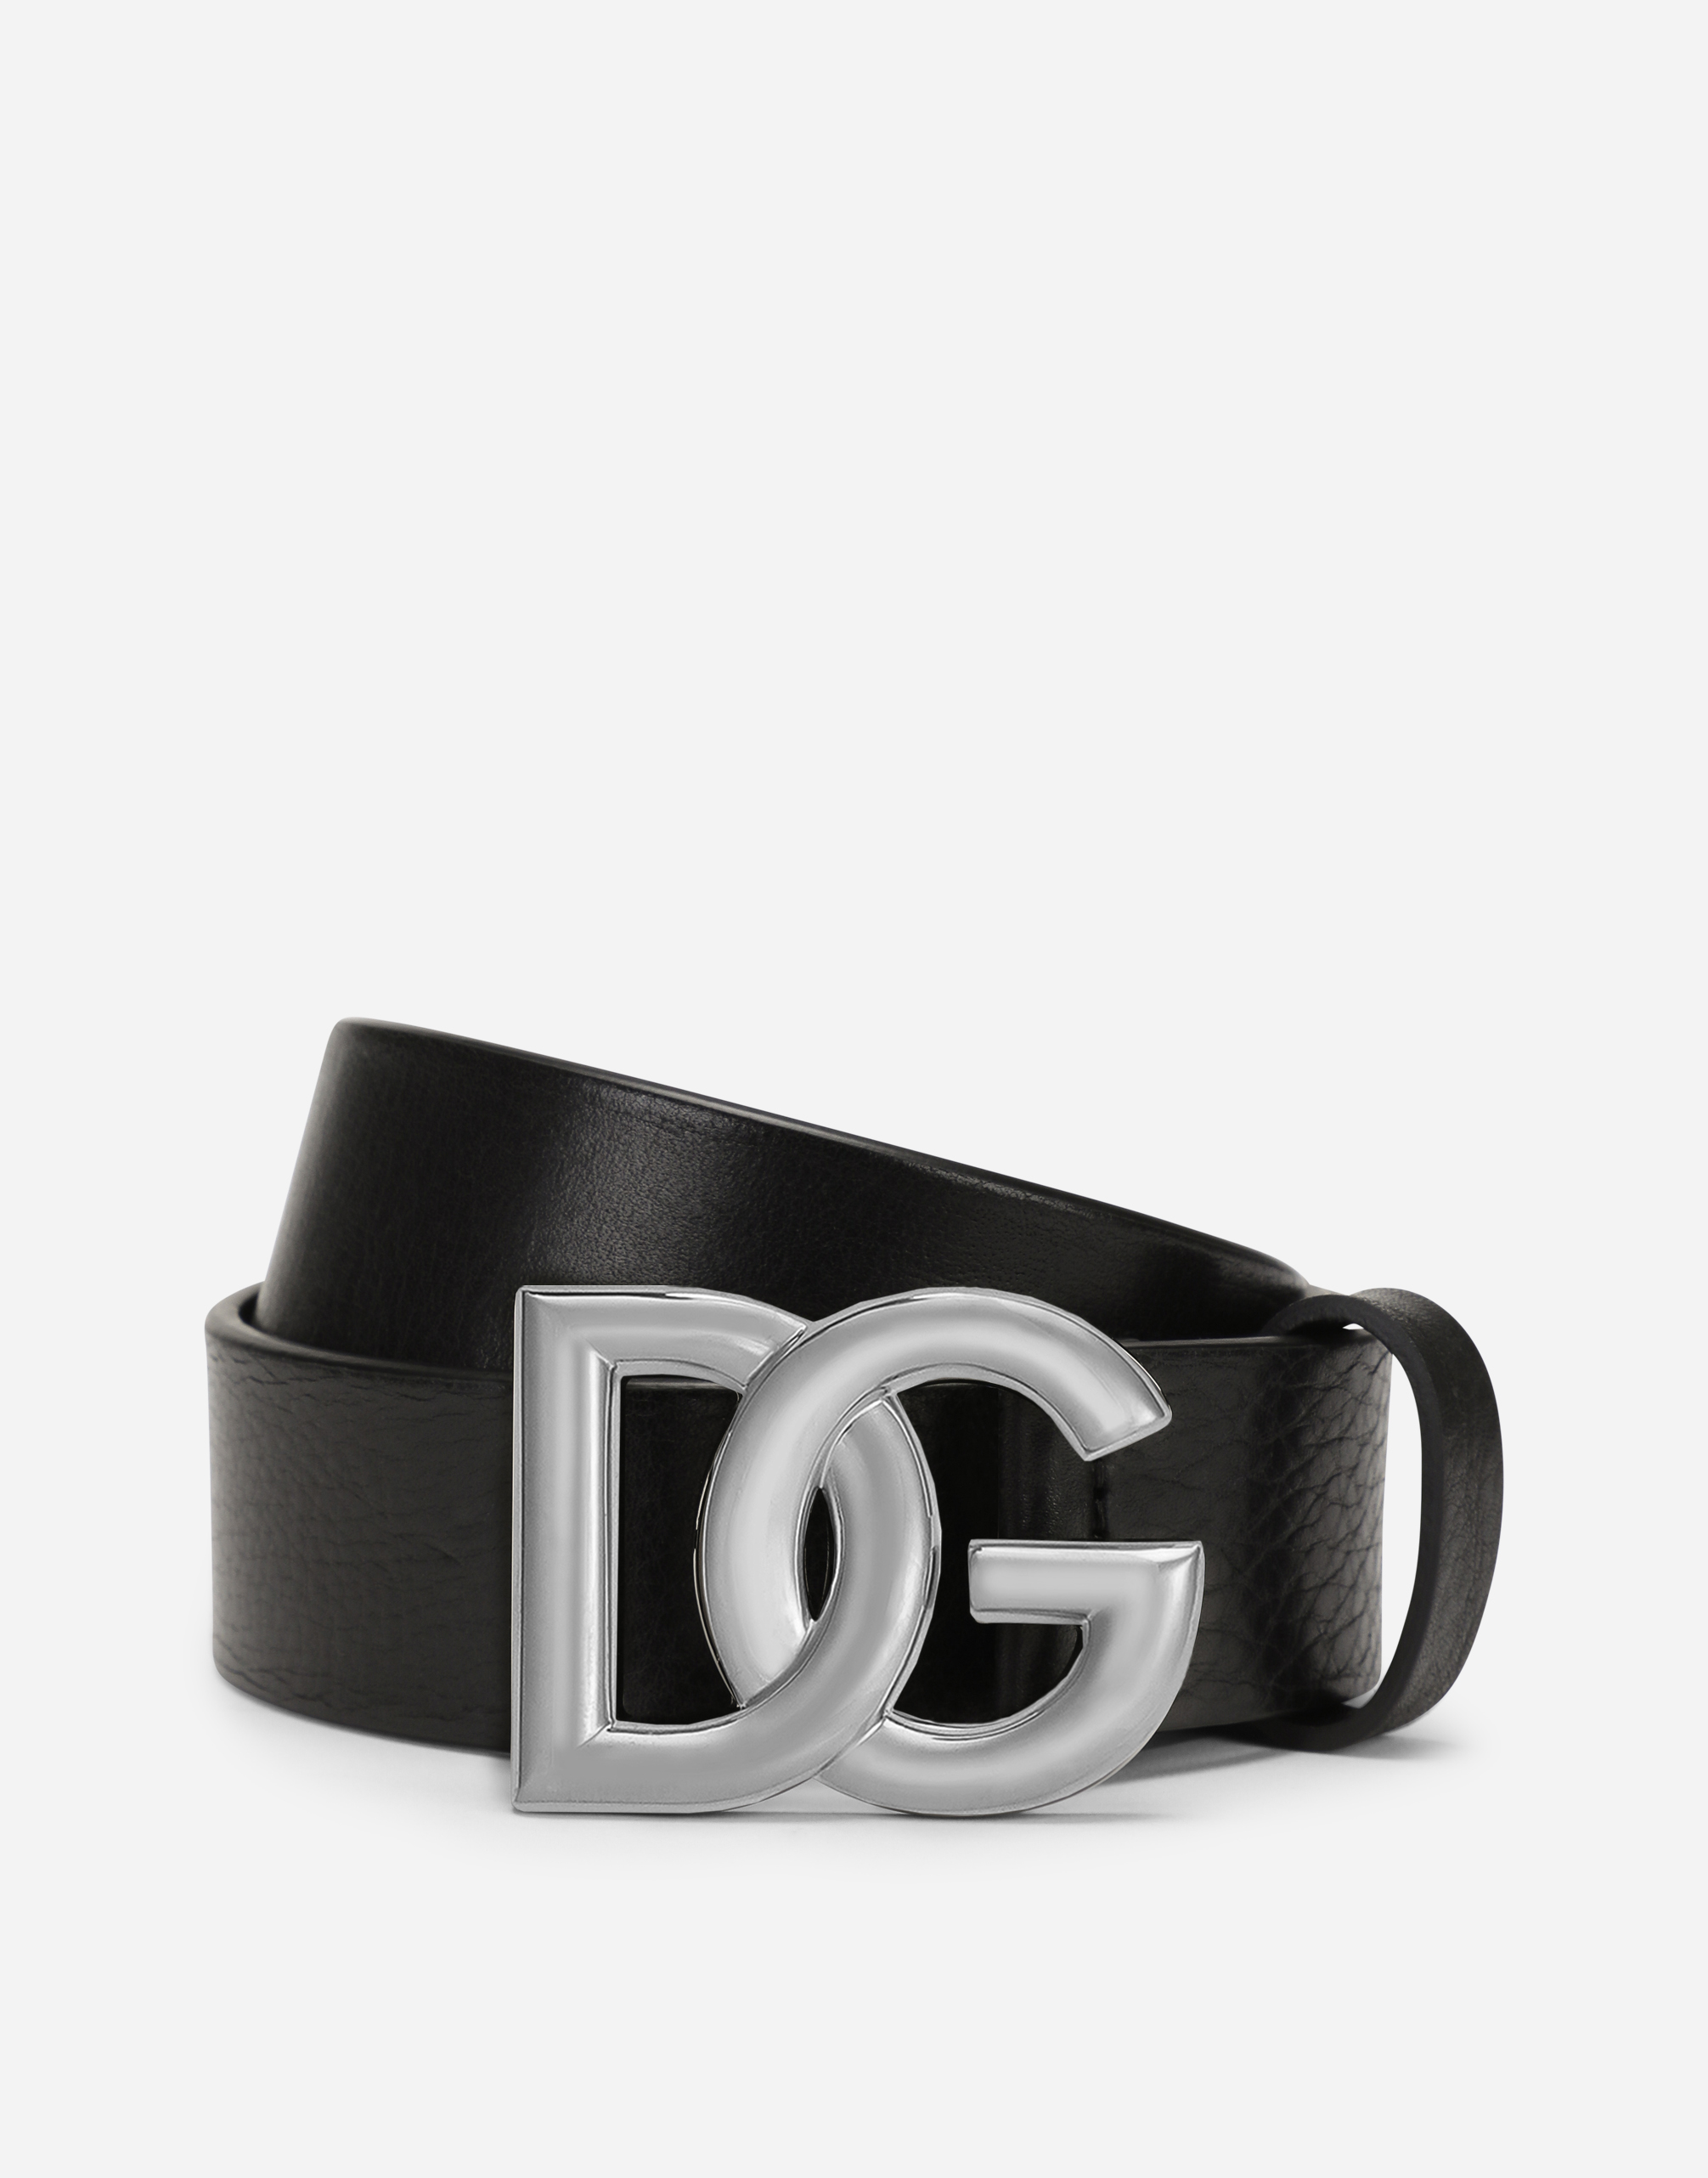 Tumbled leather belt with crossover DG logo buckle in Black for 